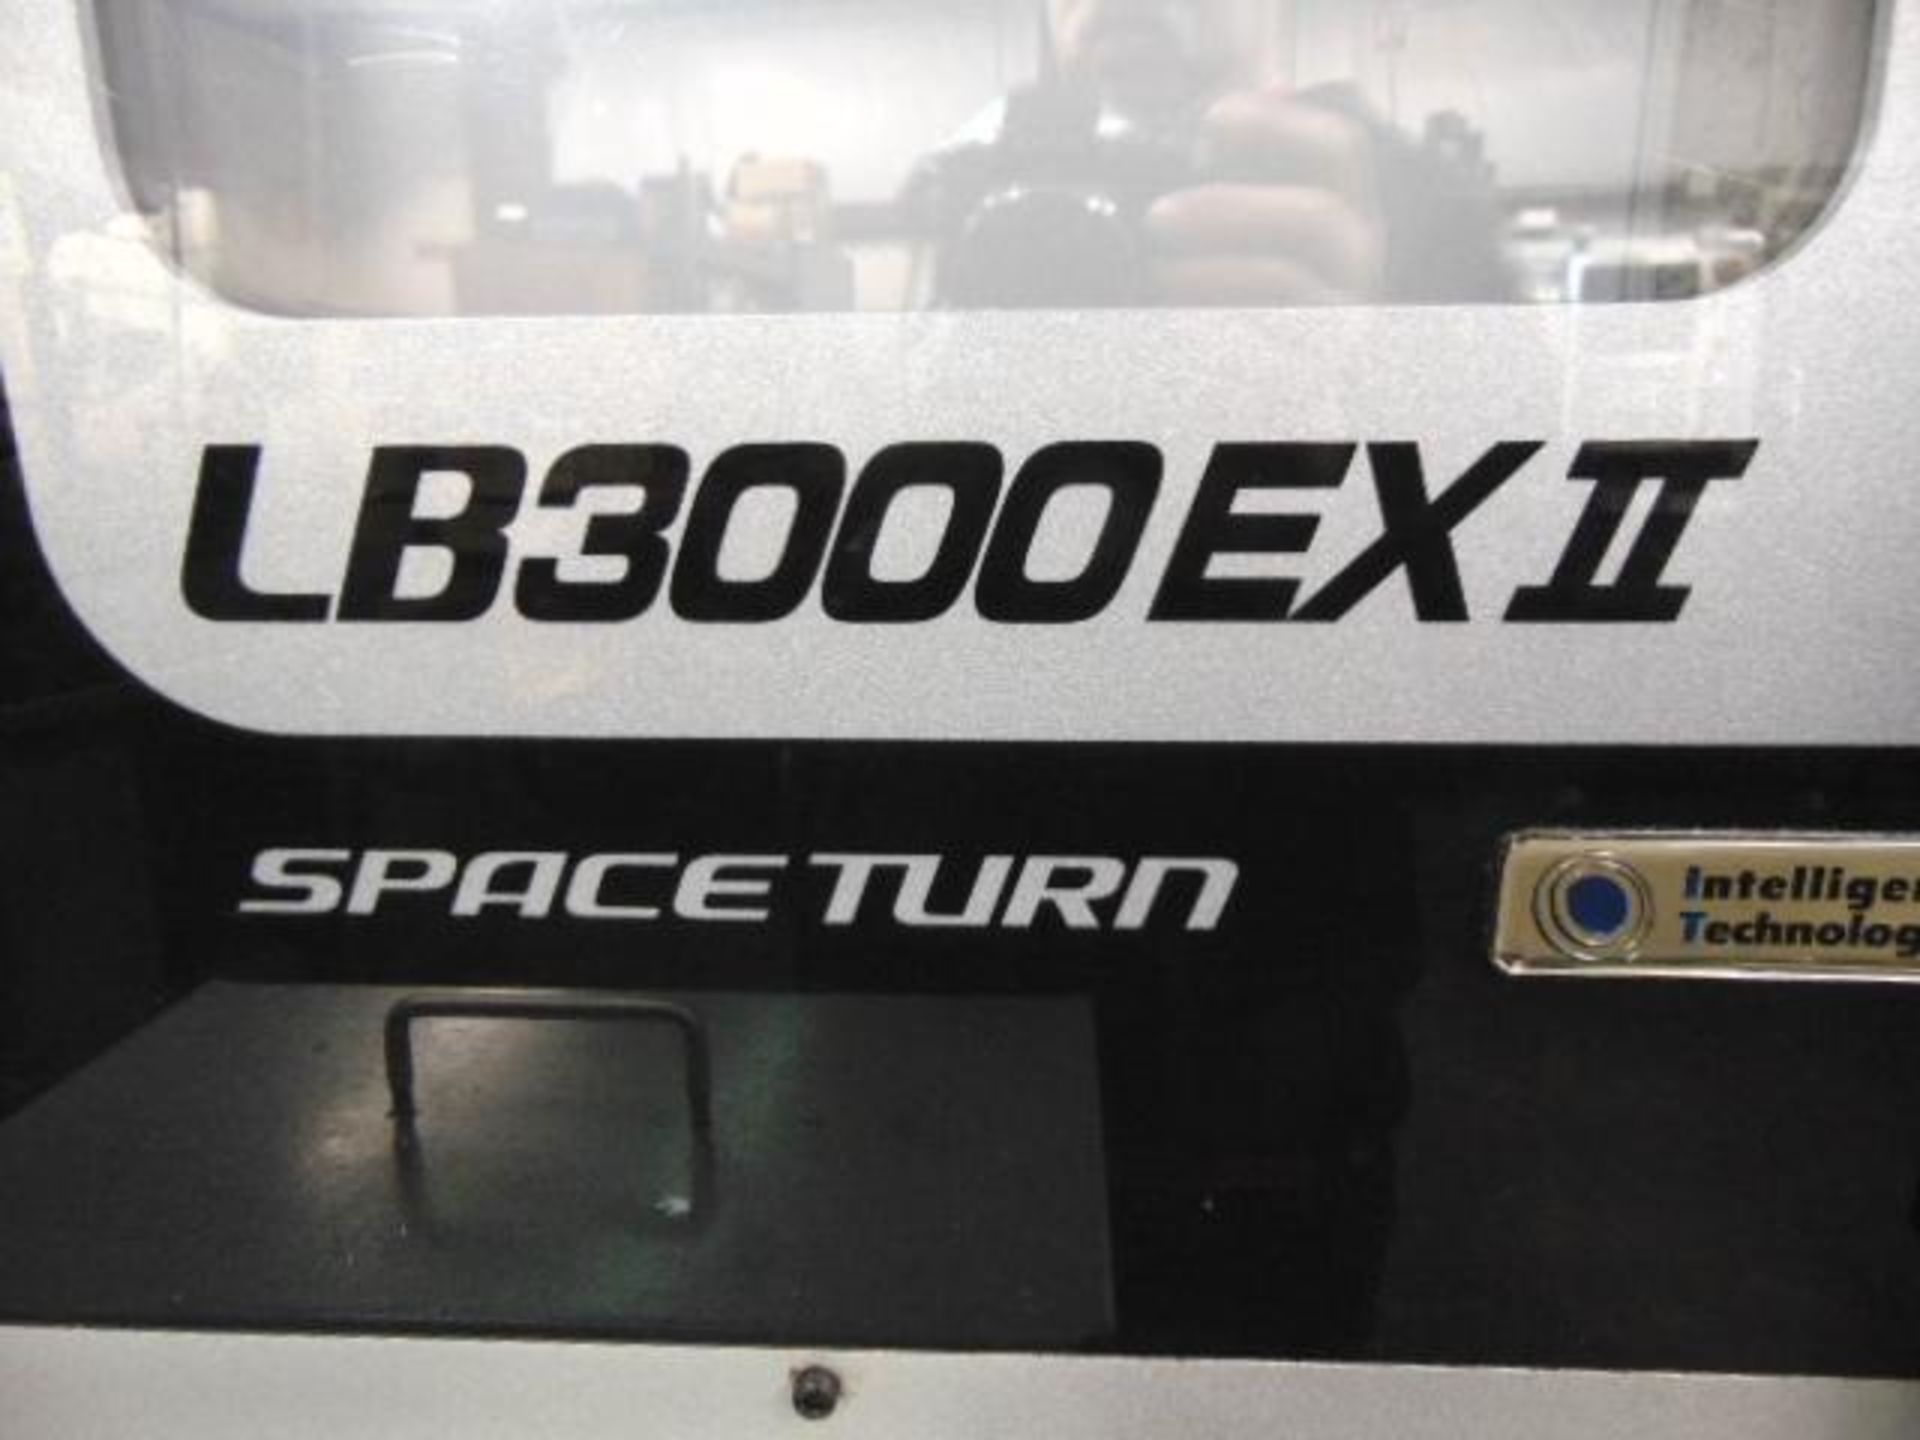 MULTI-AXIS CNC TURNING CENTER, OKUMA MDL. LB3000EXII-MYW 800 SPACE TURN, new 2015, 0SP-P300L CNC con - Image 9 of 24